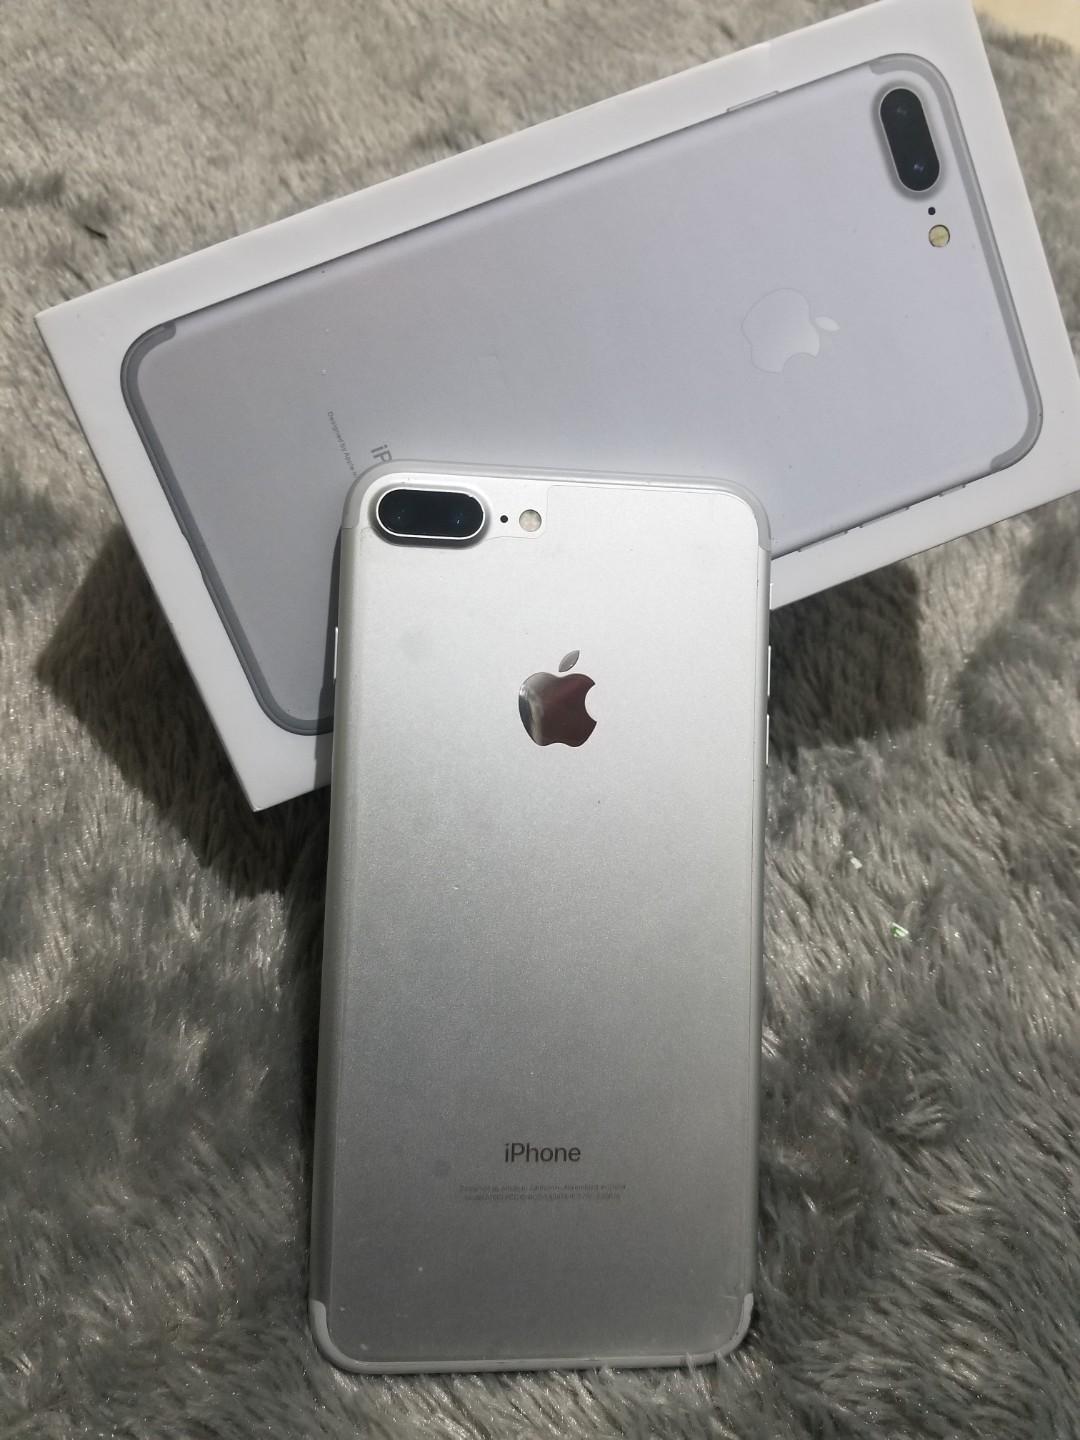 Iphone 7 Plus 128gb Silver Mulus Bnget Telepon Seluler Tablet Iphone Iphone 7 Series Di Carousell